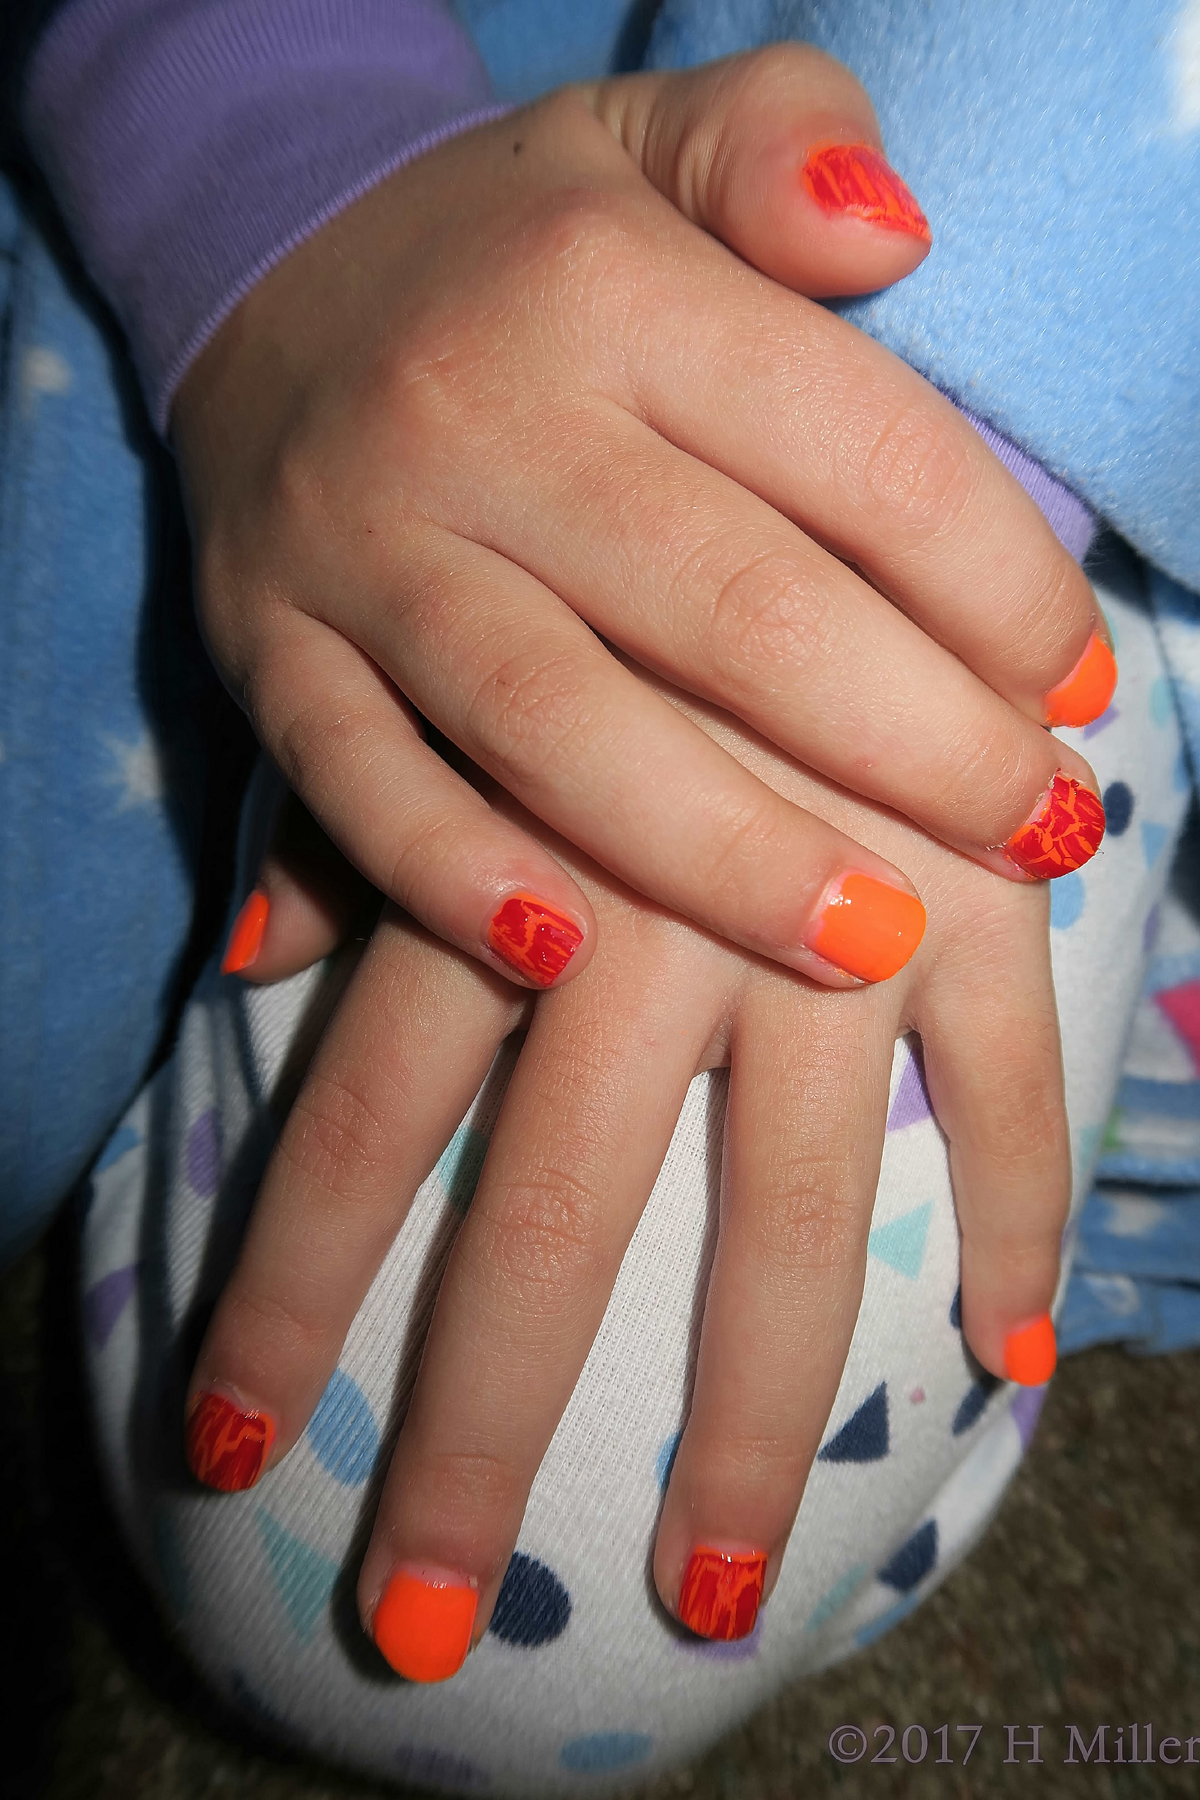 Dual Shaded Alternating Red Shatter And Orange Kids Mani.